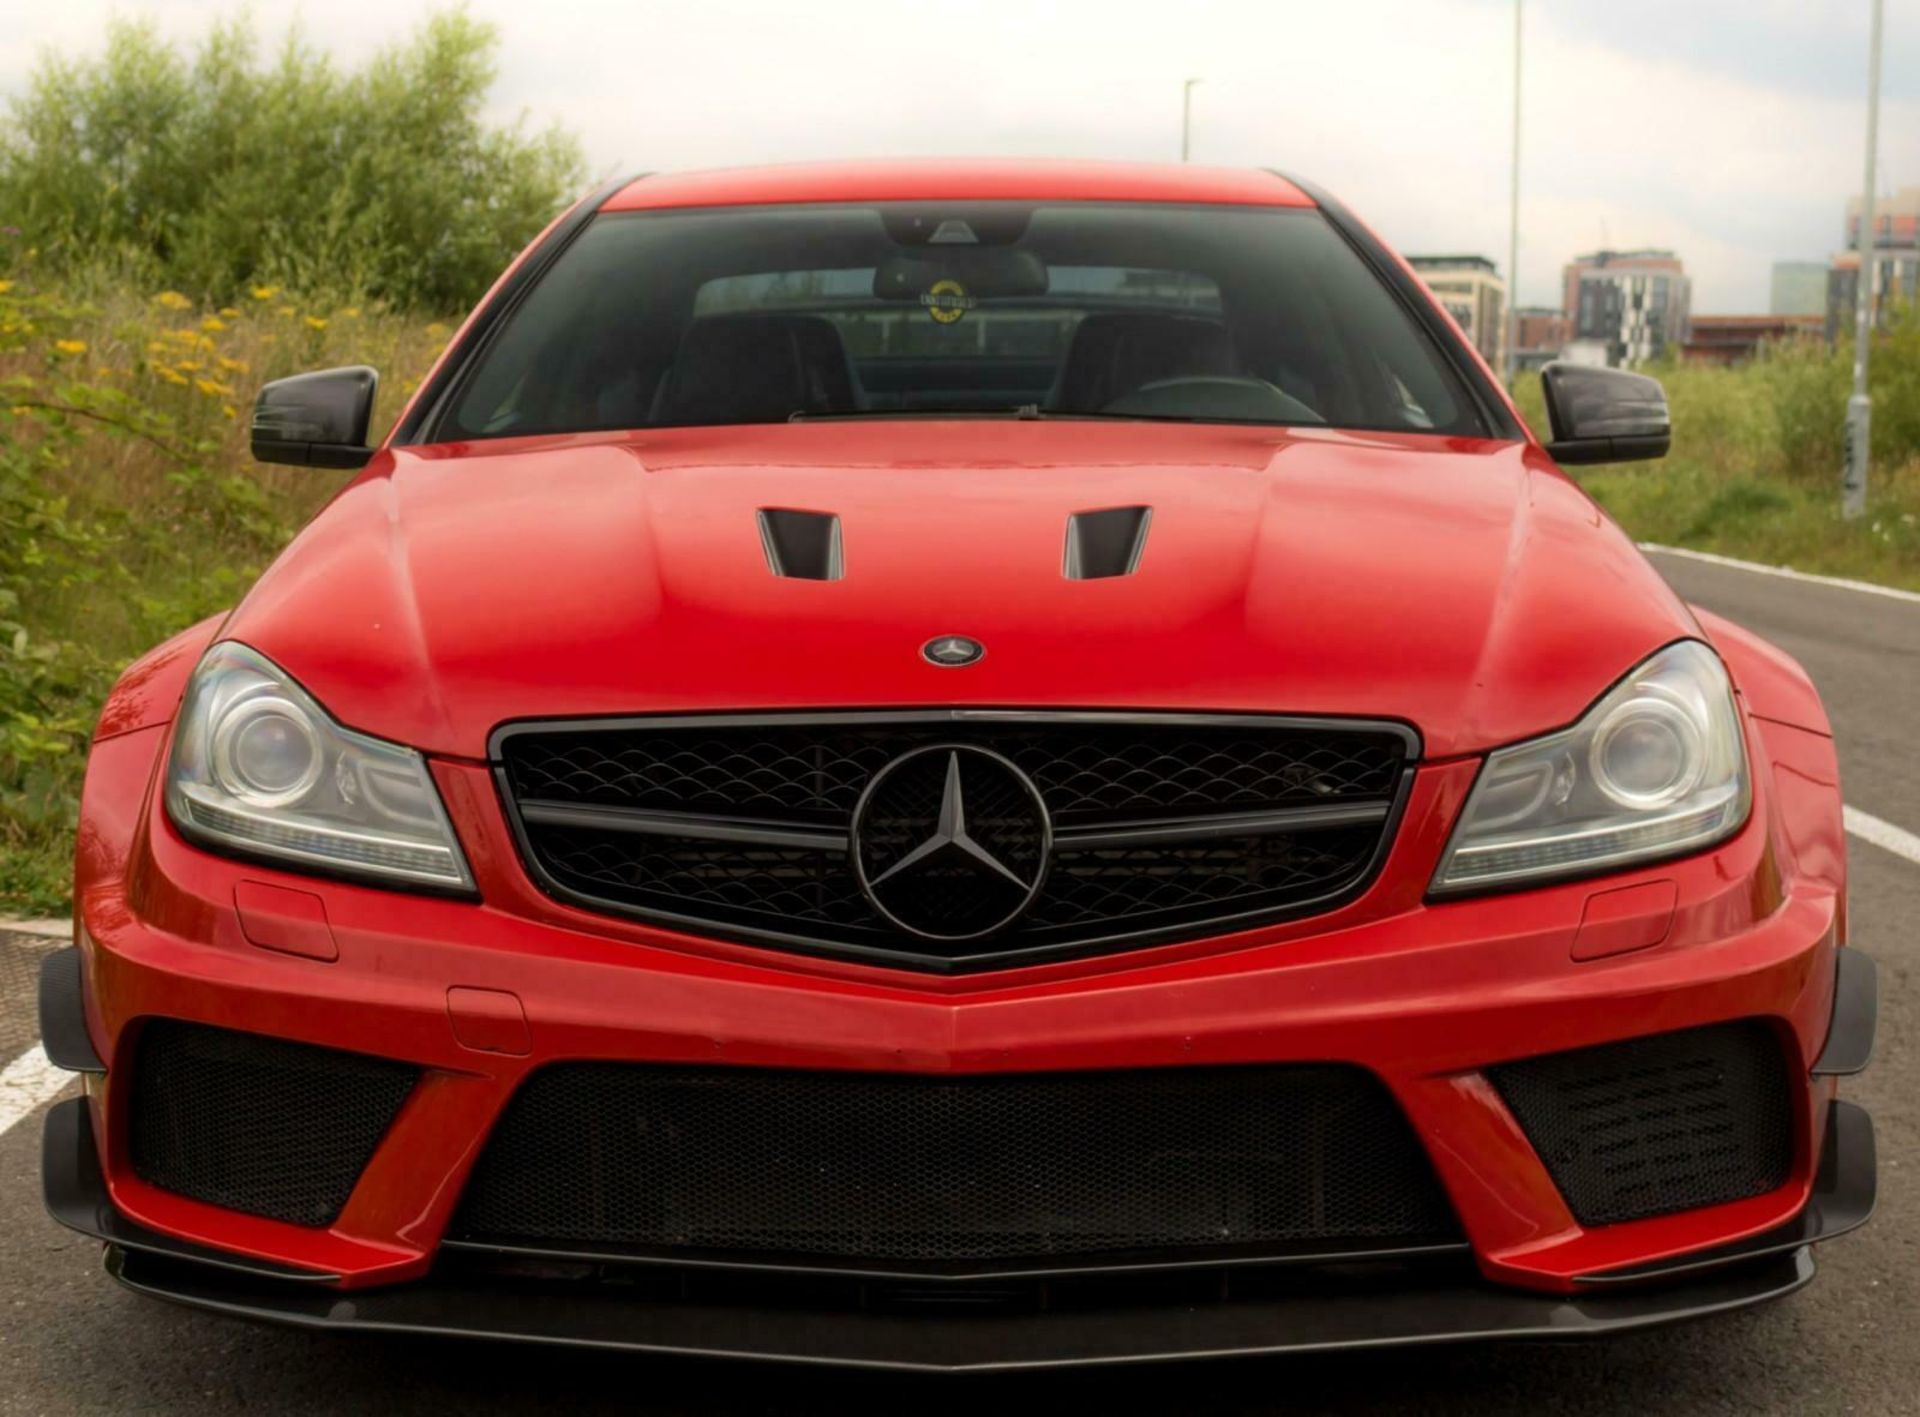 MERCEDES-BENZ C63 AMG BLACK SERIES (1 OF 600 MADE) - Image 2 of 12